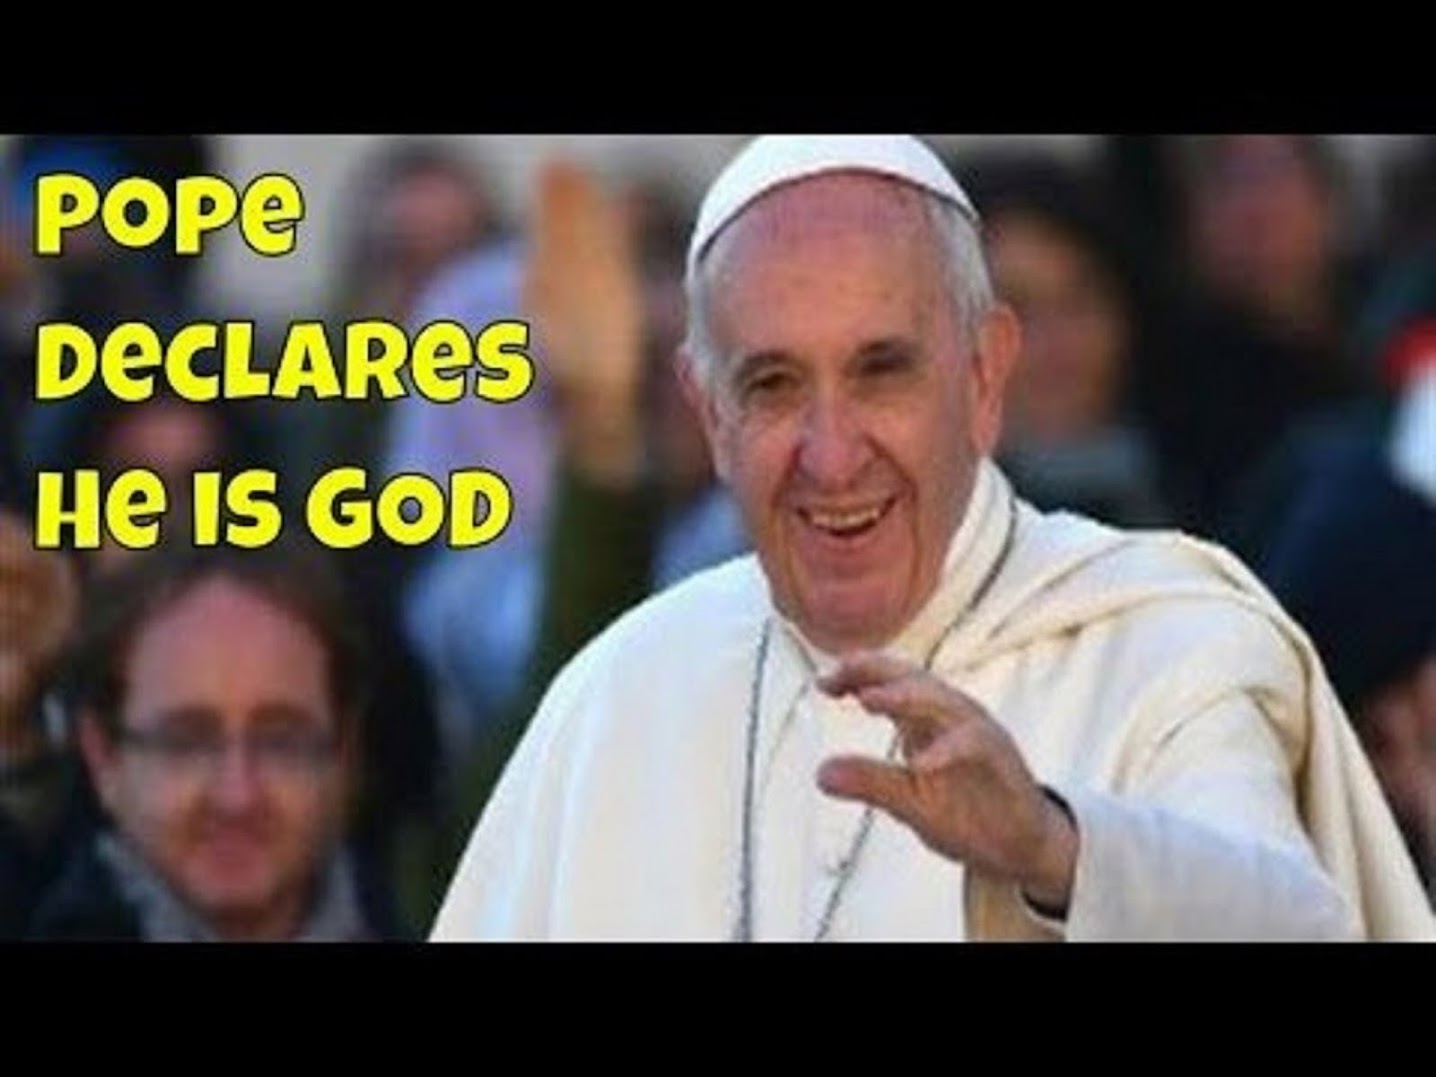 POPE DECLARES HE IS GOD - PEOPLE WHO THOUGHT THEY WERE GOD